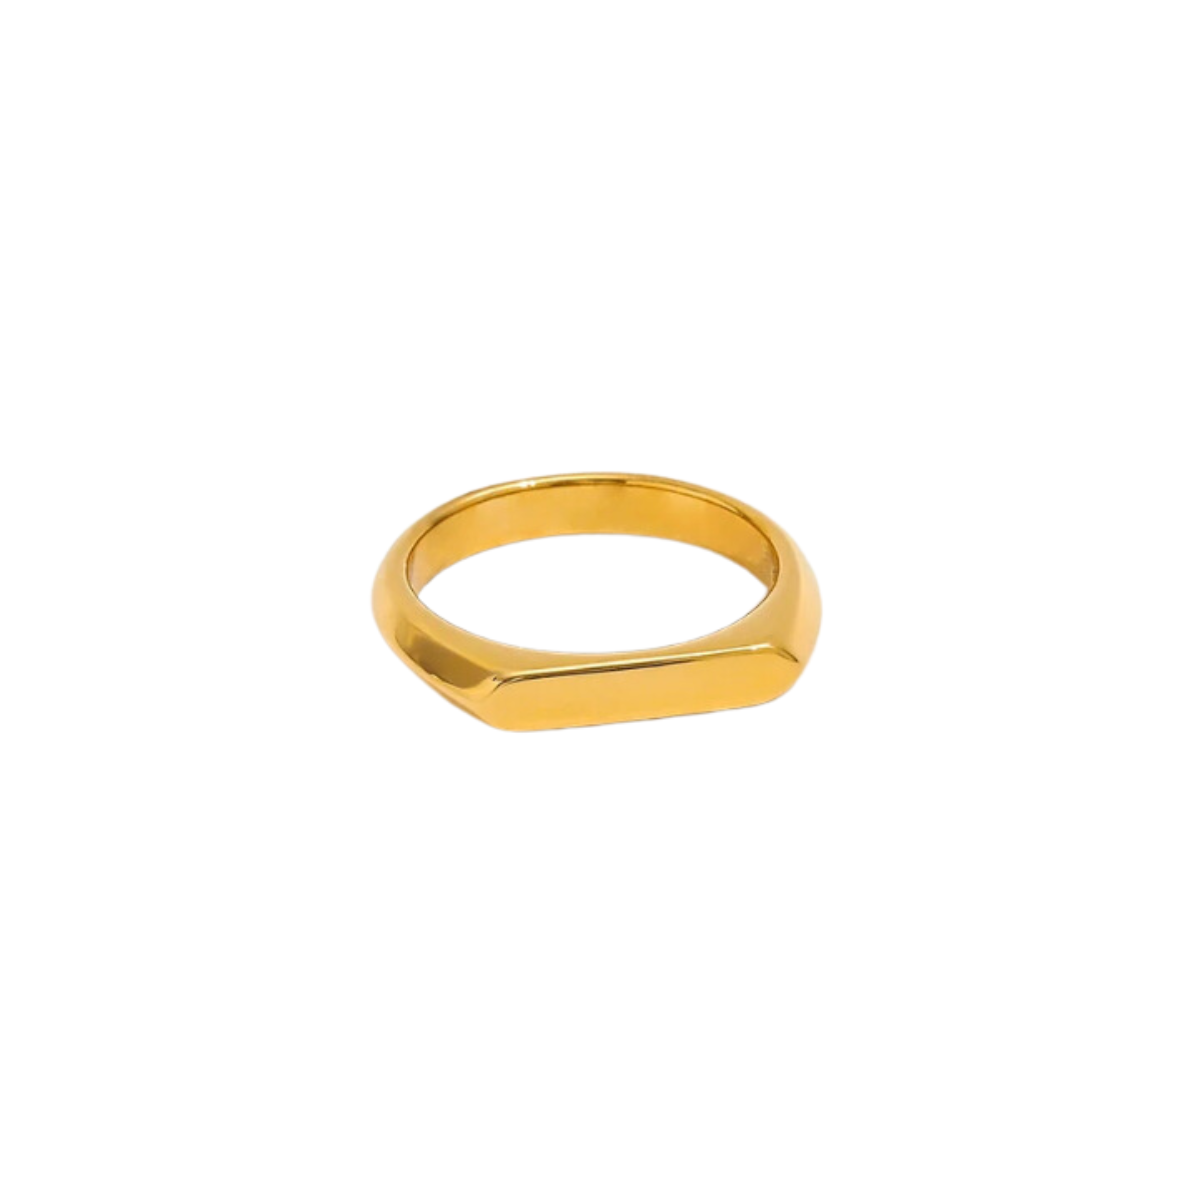 Valance 18k Gold Plated Petite Ring